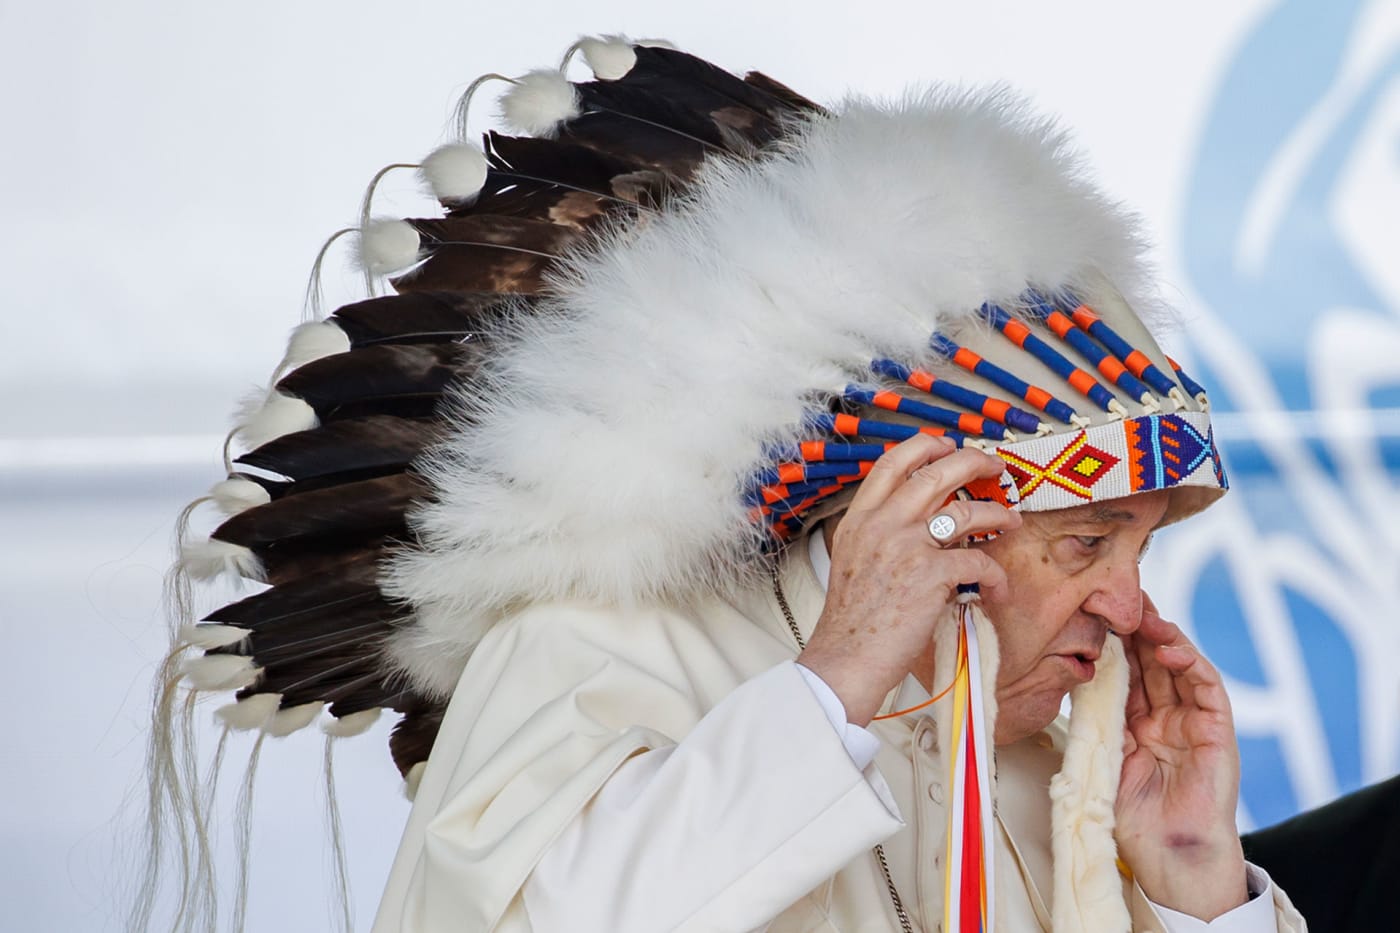 Pope Francis wears a traditional headdress that was gifted to him following his apology during his visit to Maskwacis, Canada